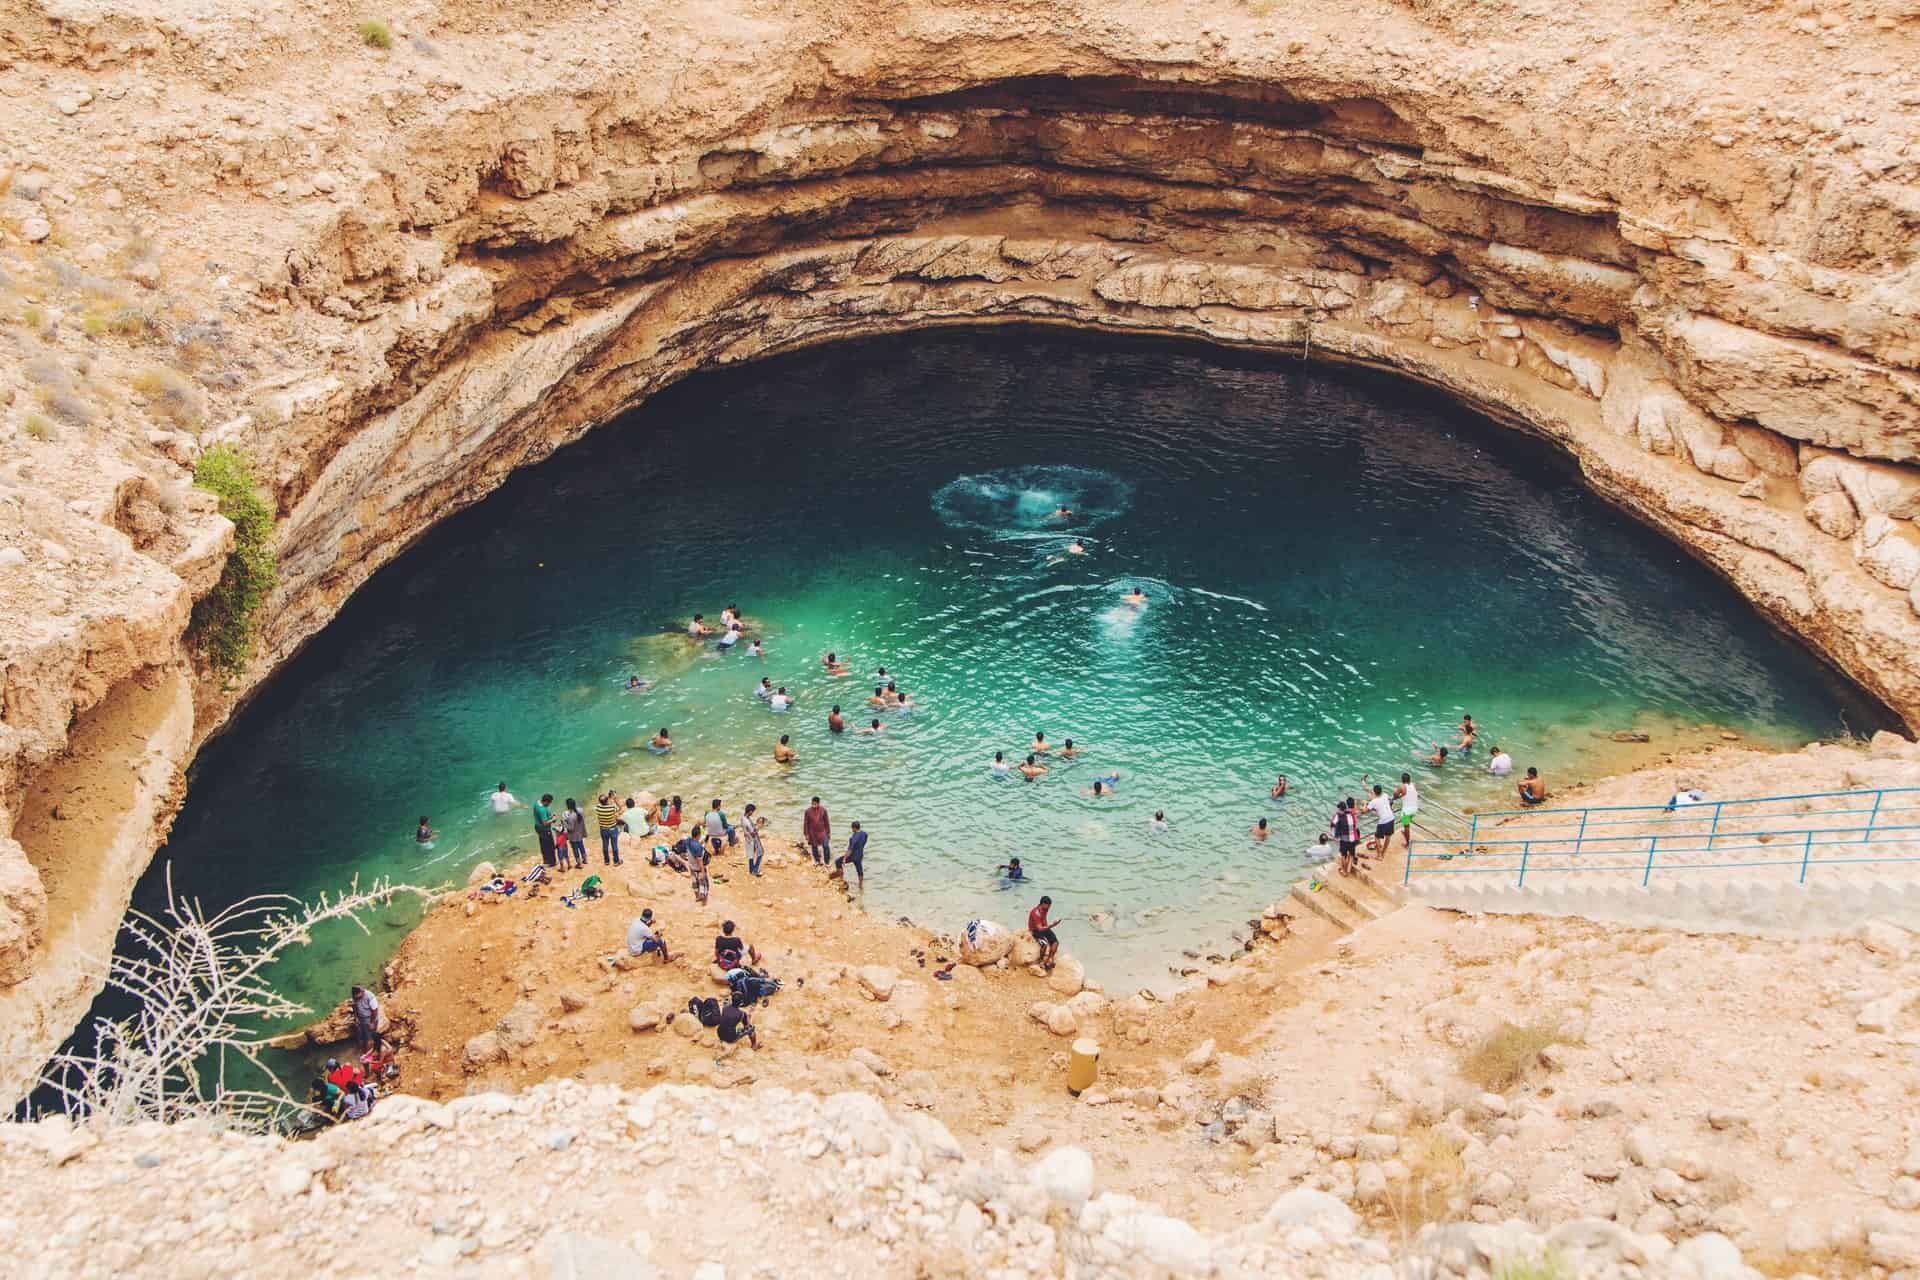 Locals and tourists enjoying a dip at one of Oman's famous sinkholes